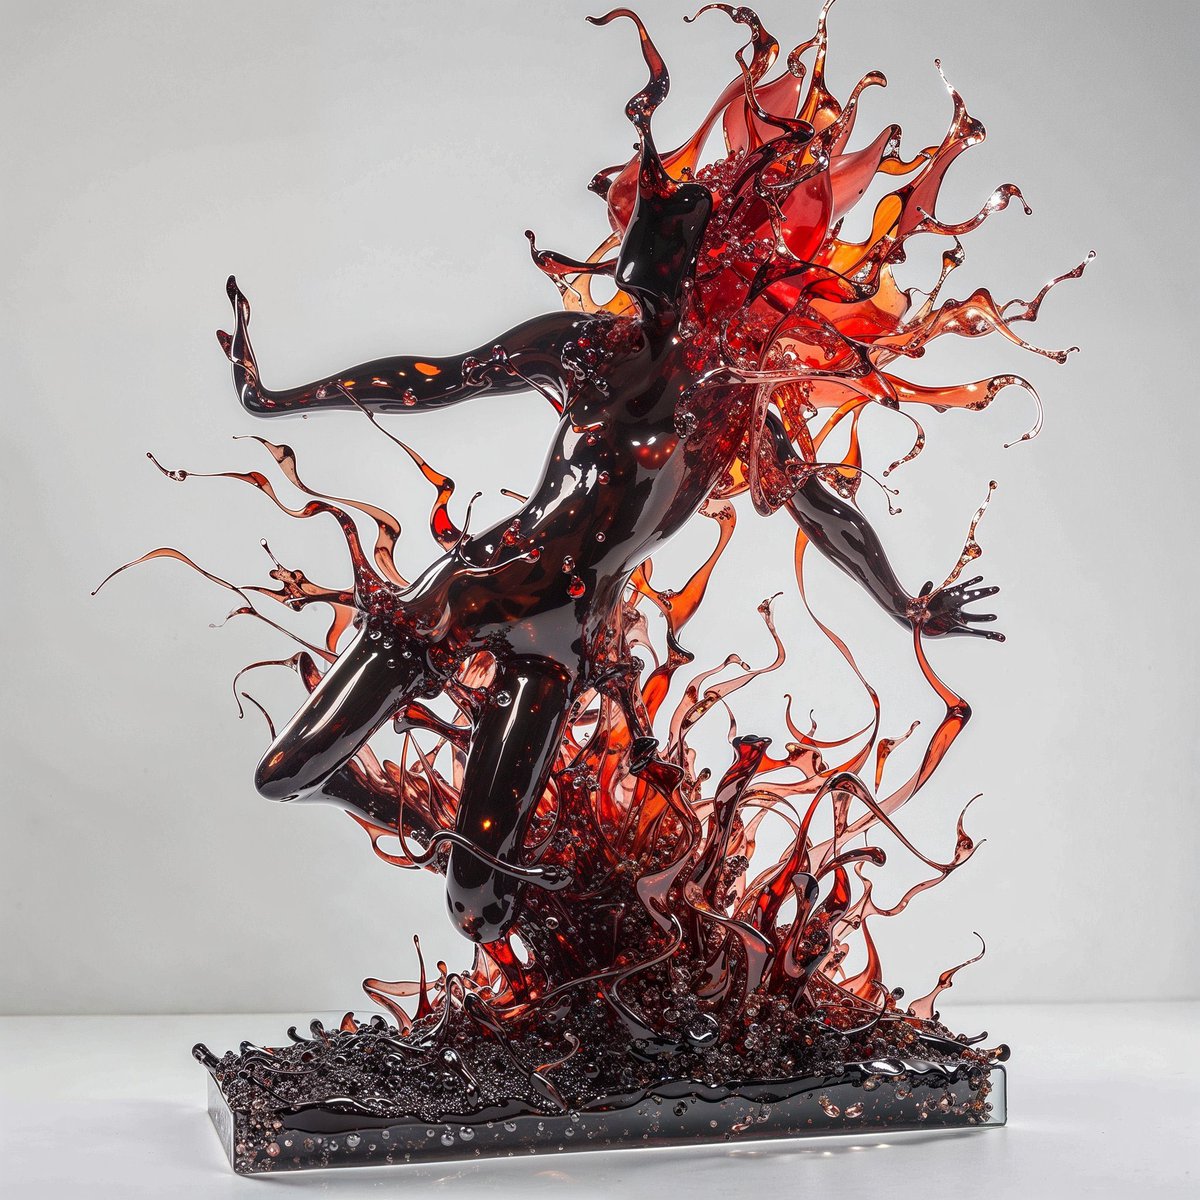 I used Midjourney v6 to create glass sculptures inspired by 12 different emotions. The results are simply beautiful.

1. Anger